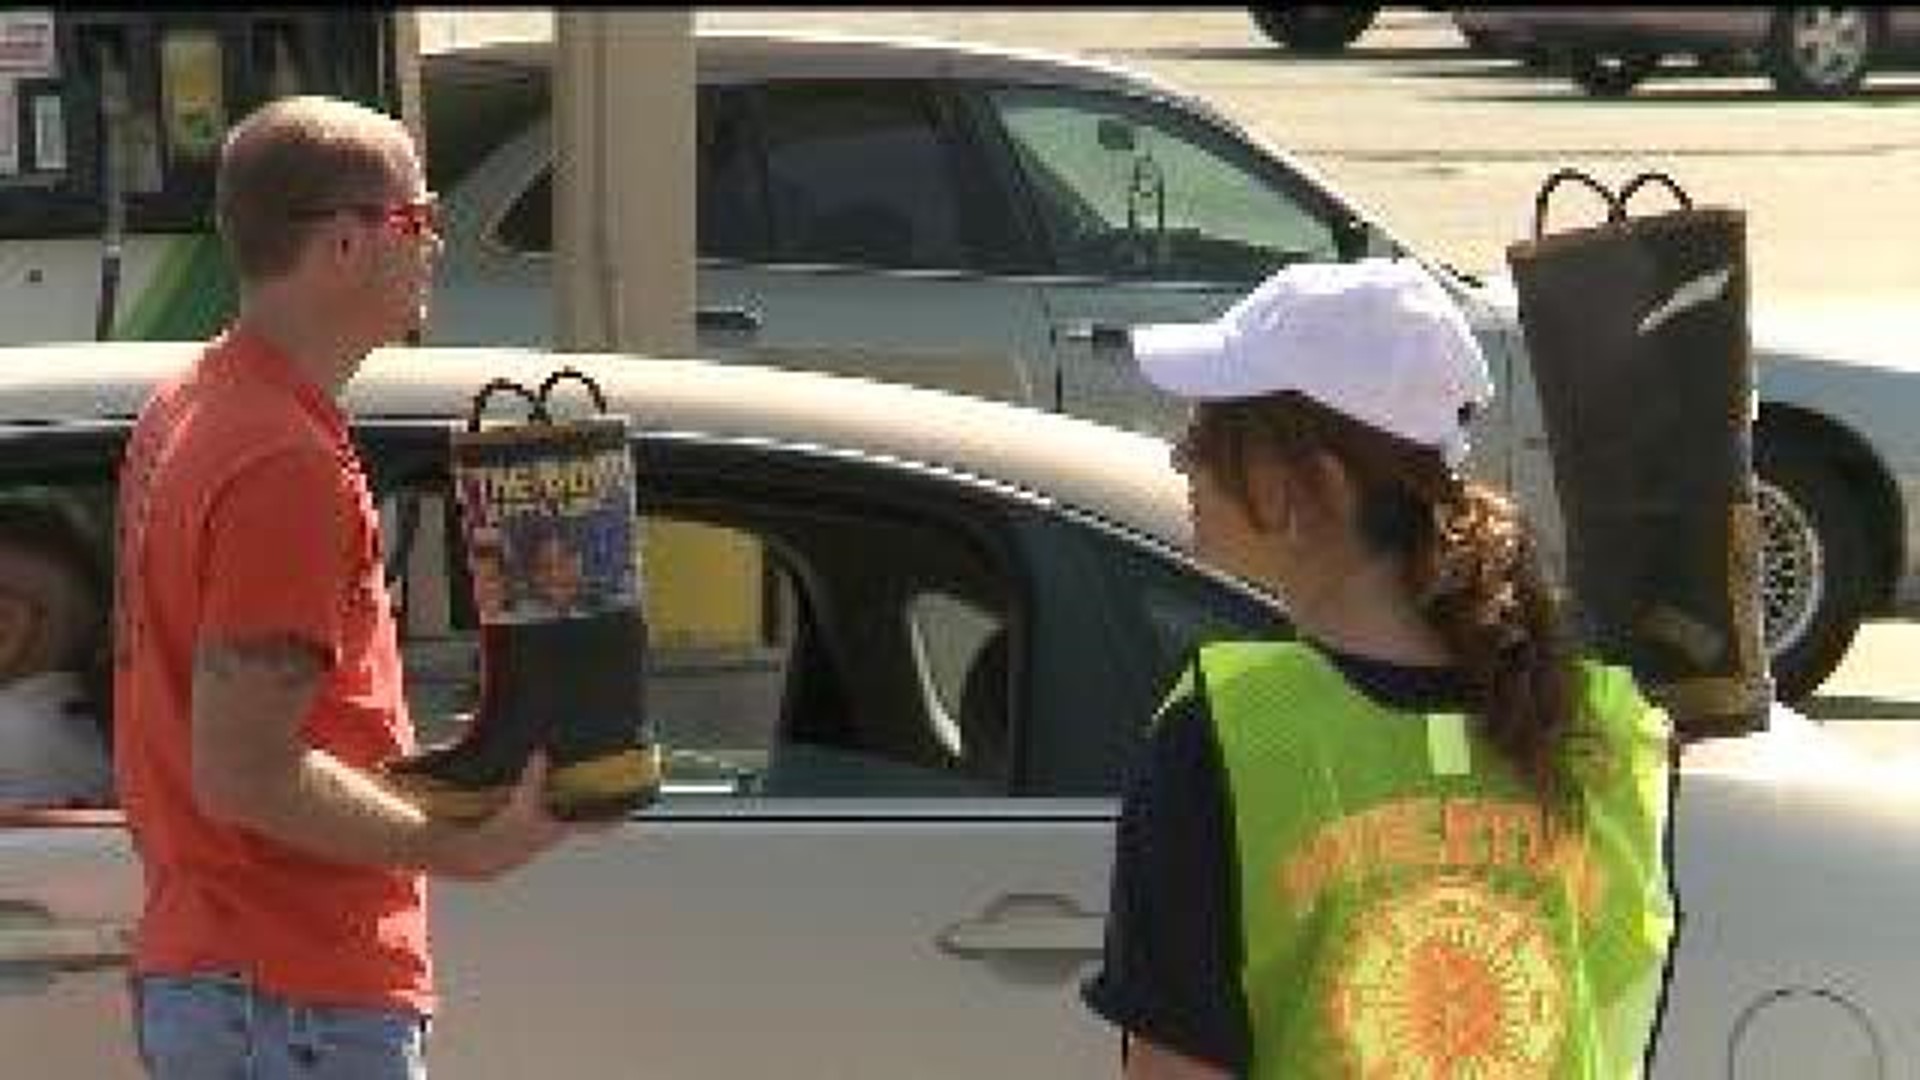 Last time Muscatine firefighters will hold Fill the Boot drive on the street